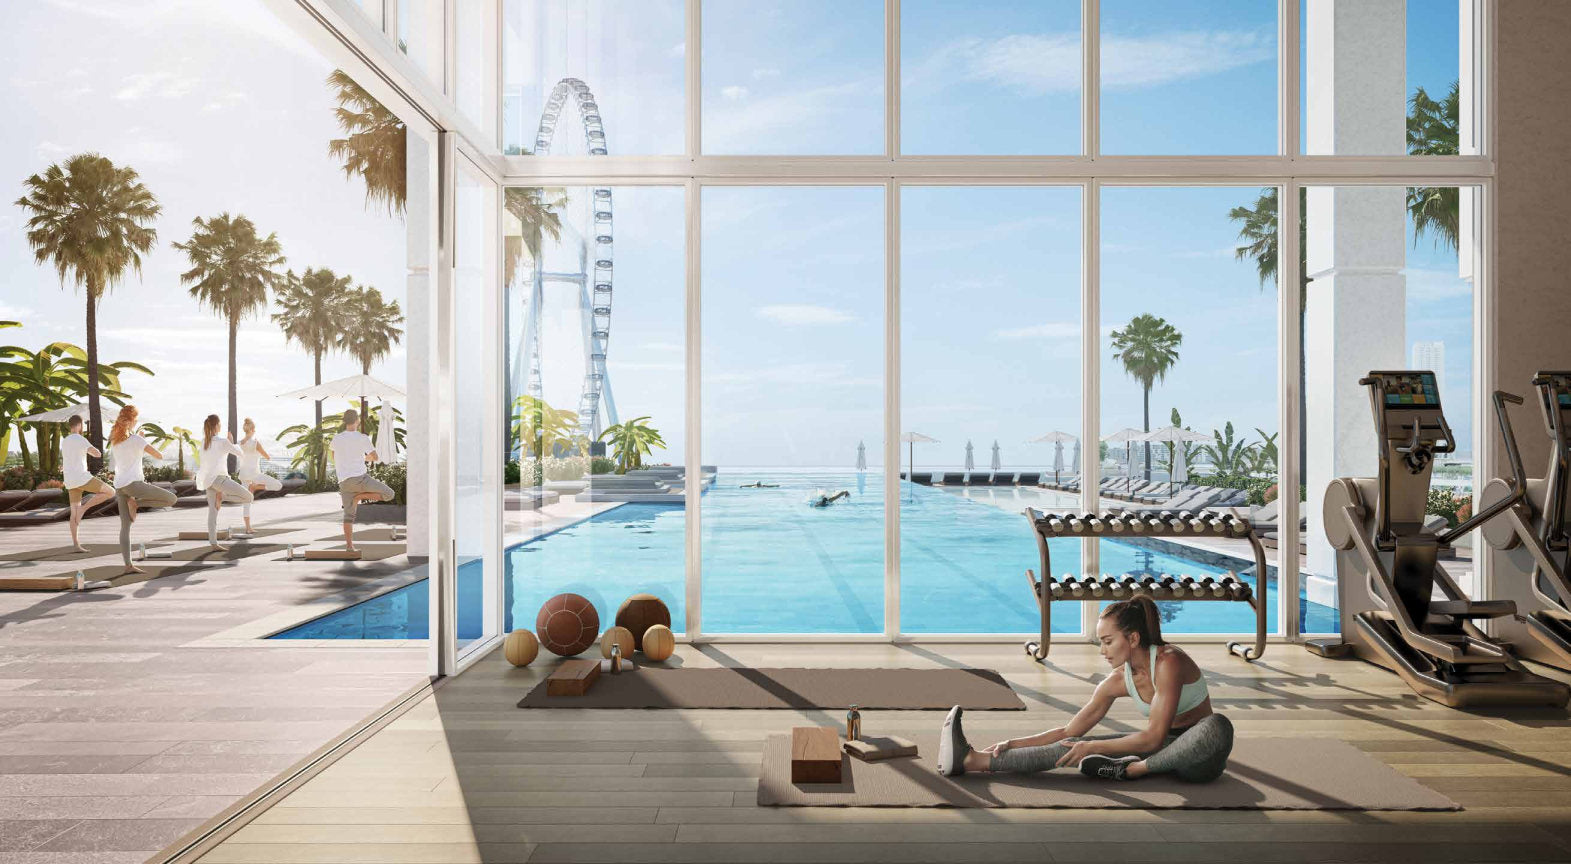 Bluewaters Bay Dubai Properties from PREMIER HEIGHTS 